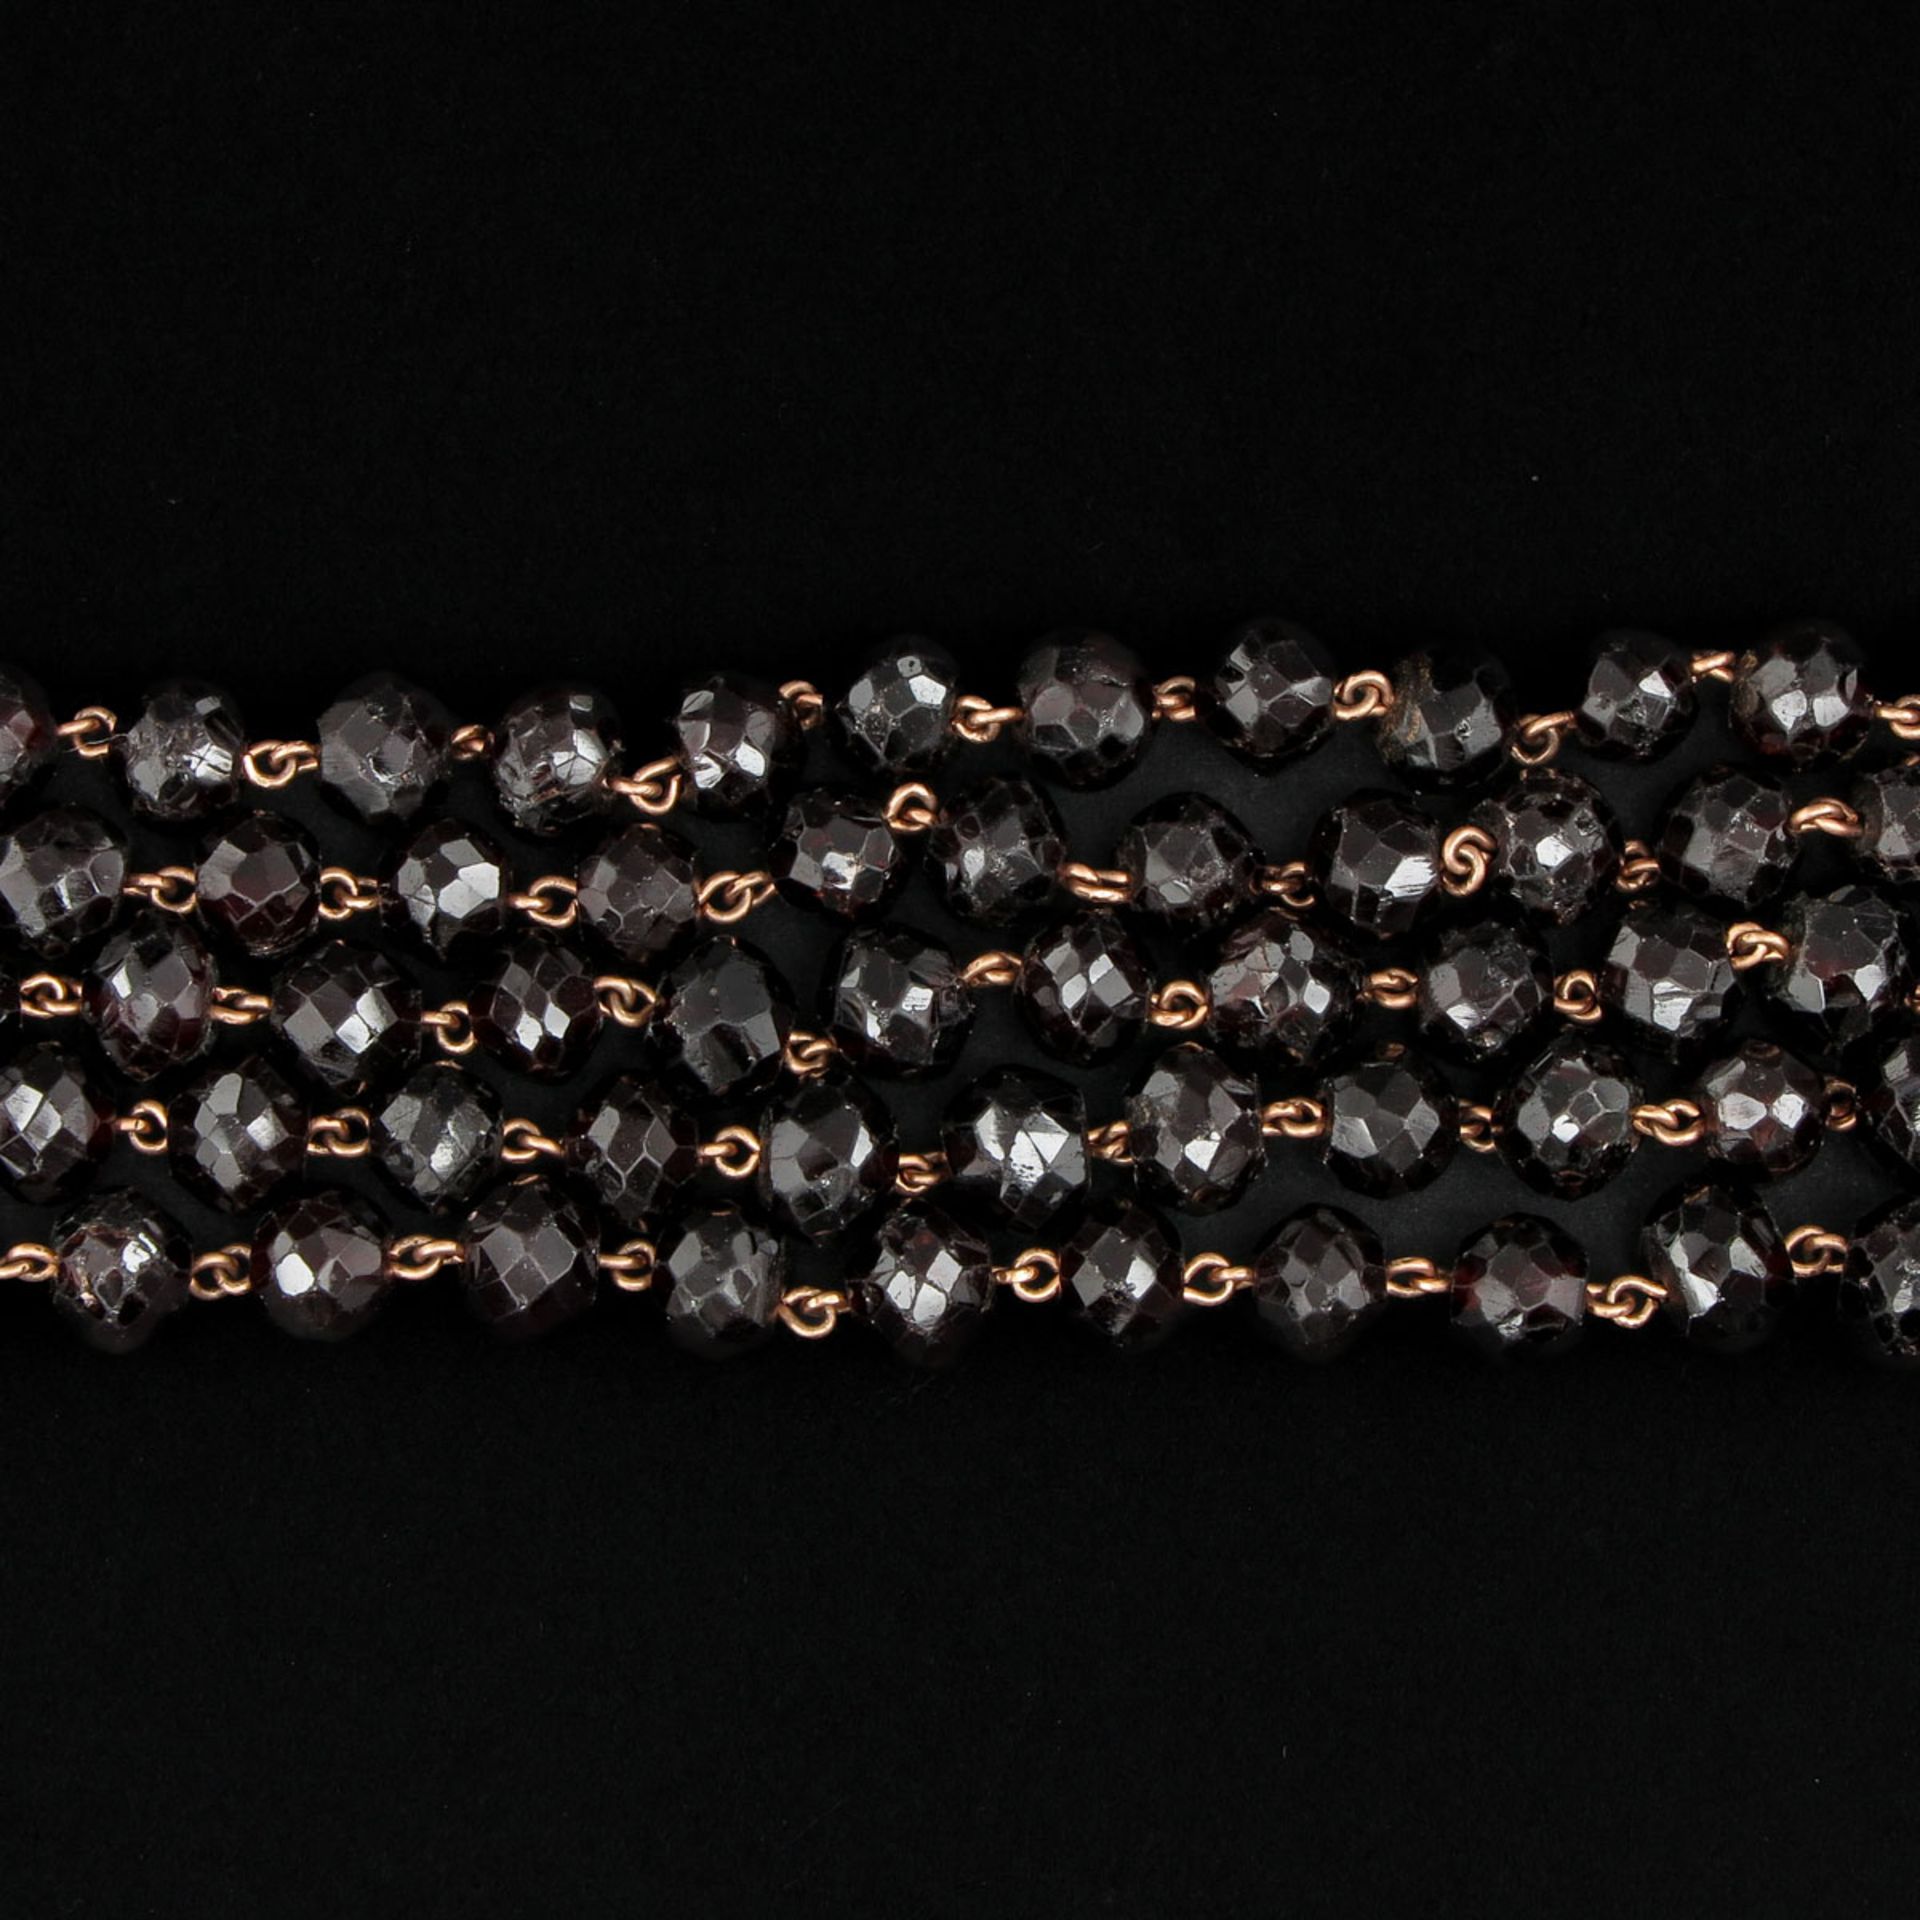 A Faceted Garnet Necklace - Image 4 of 6